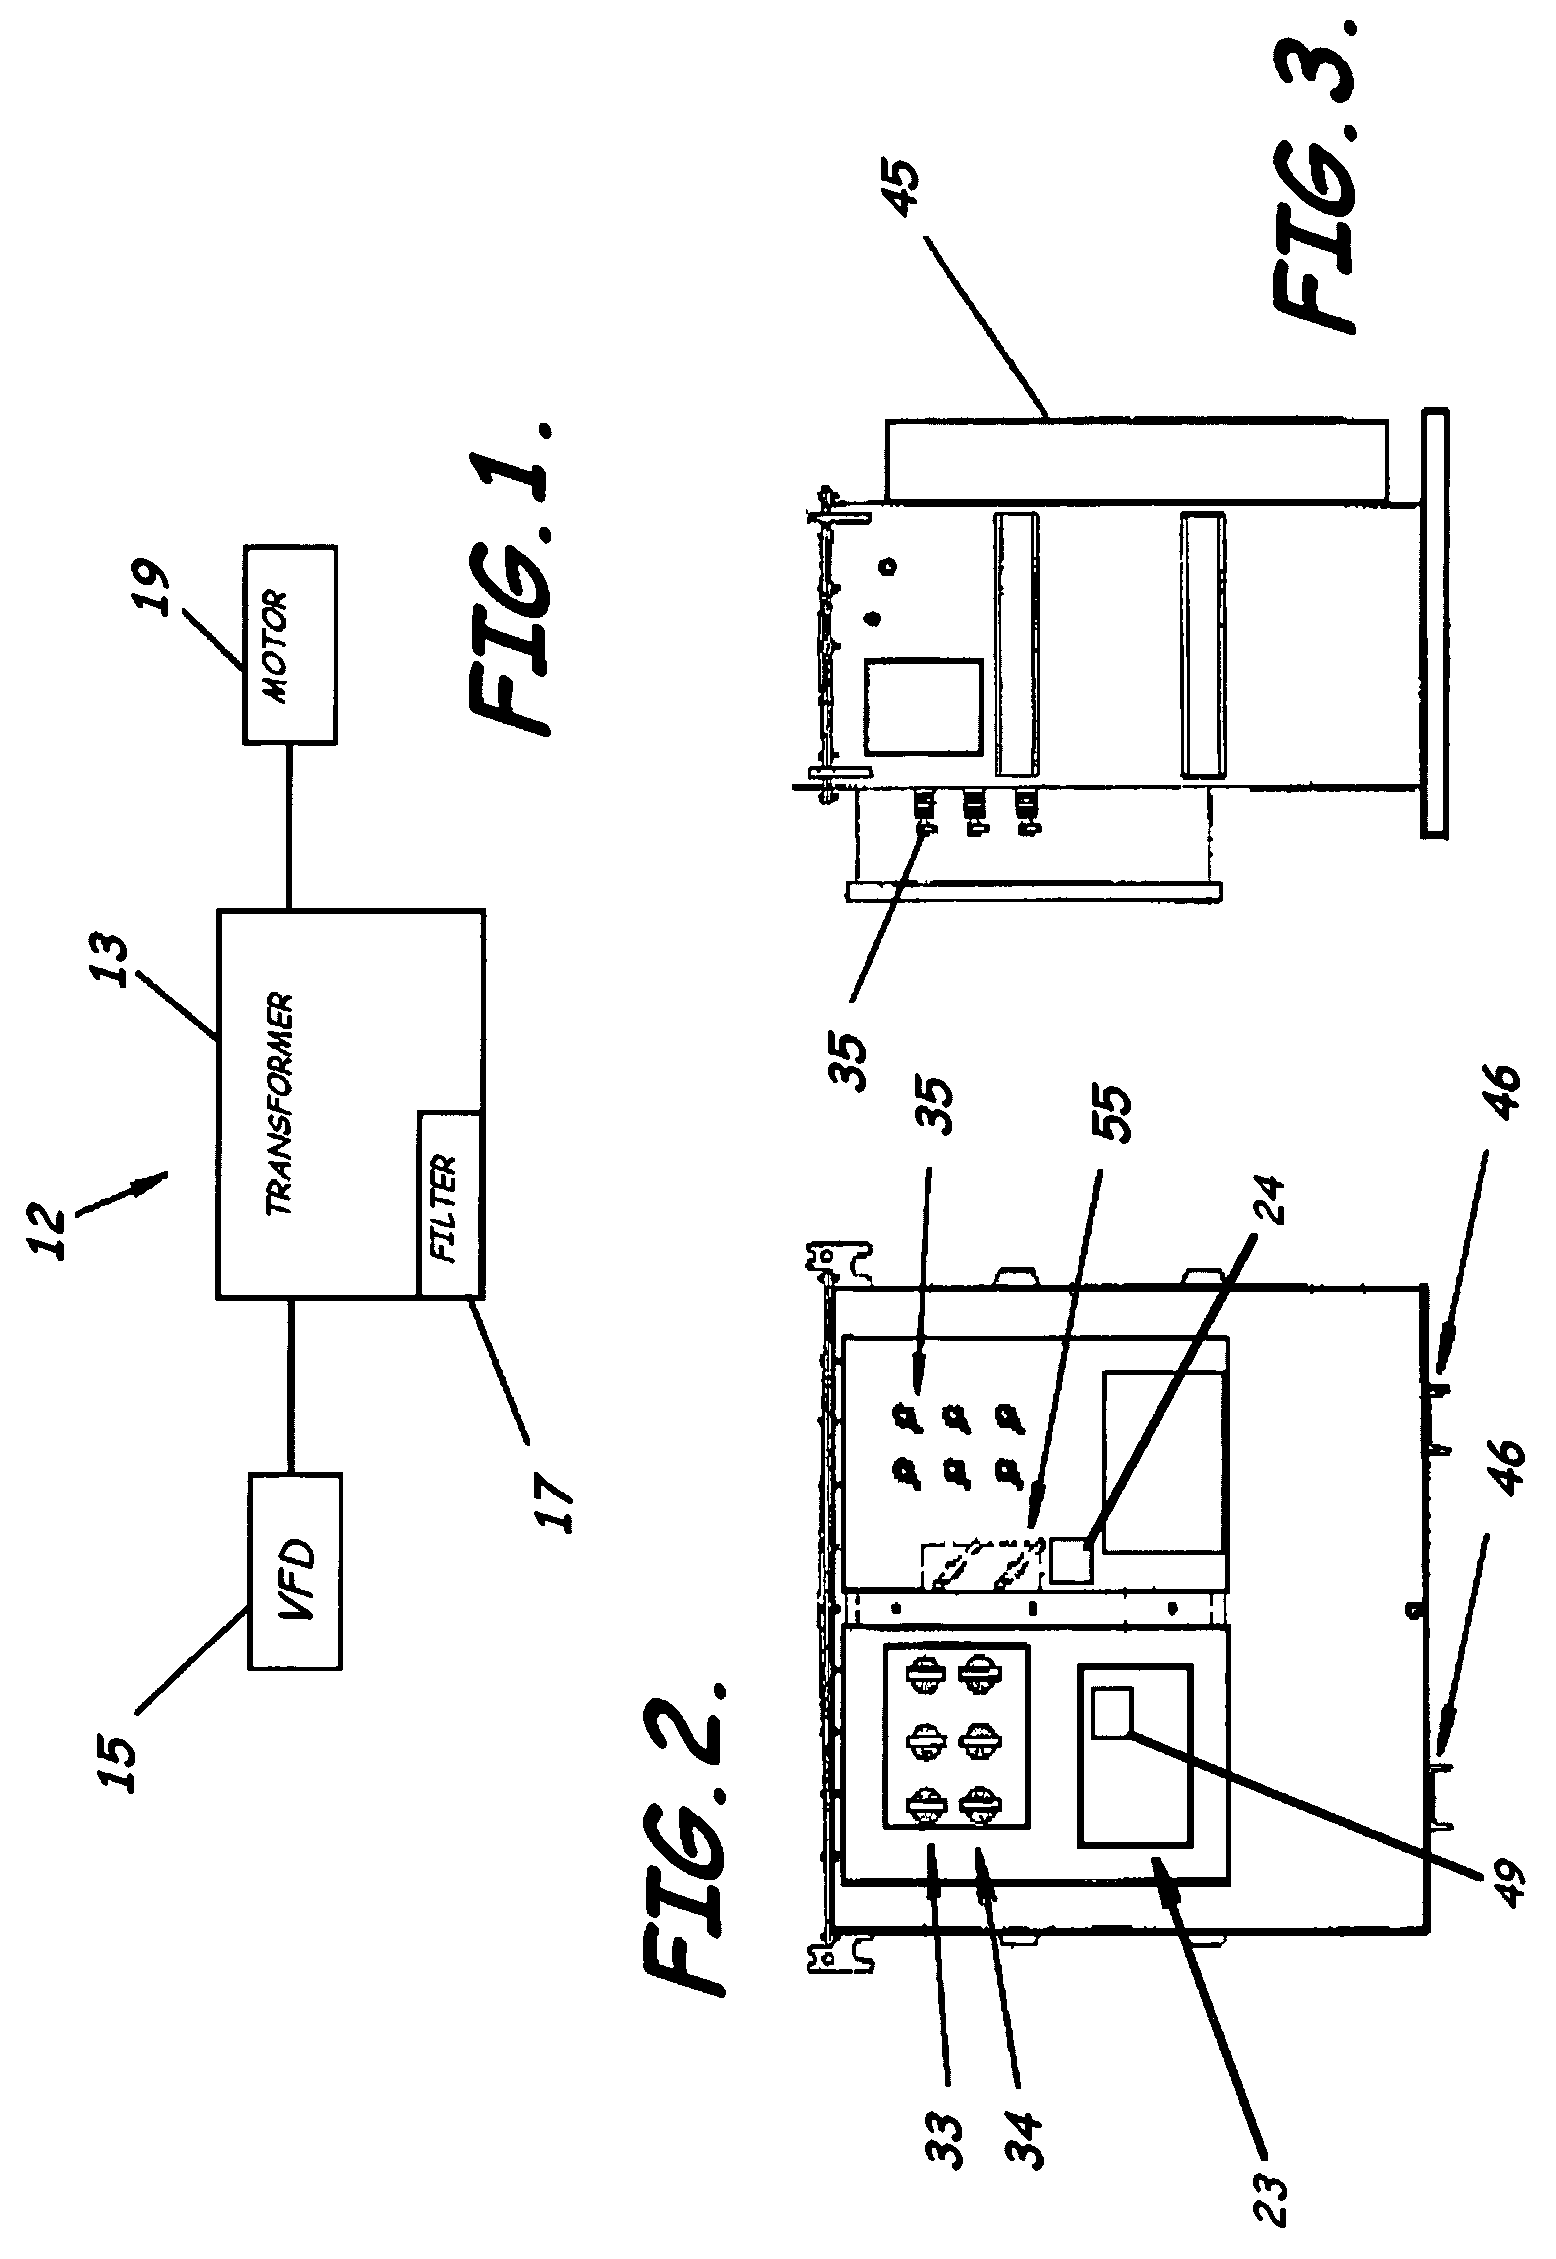 Systems and methods for driving large capacity AC motors